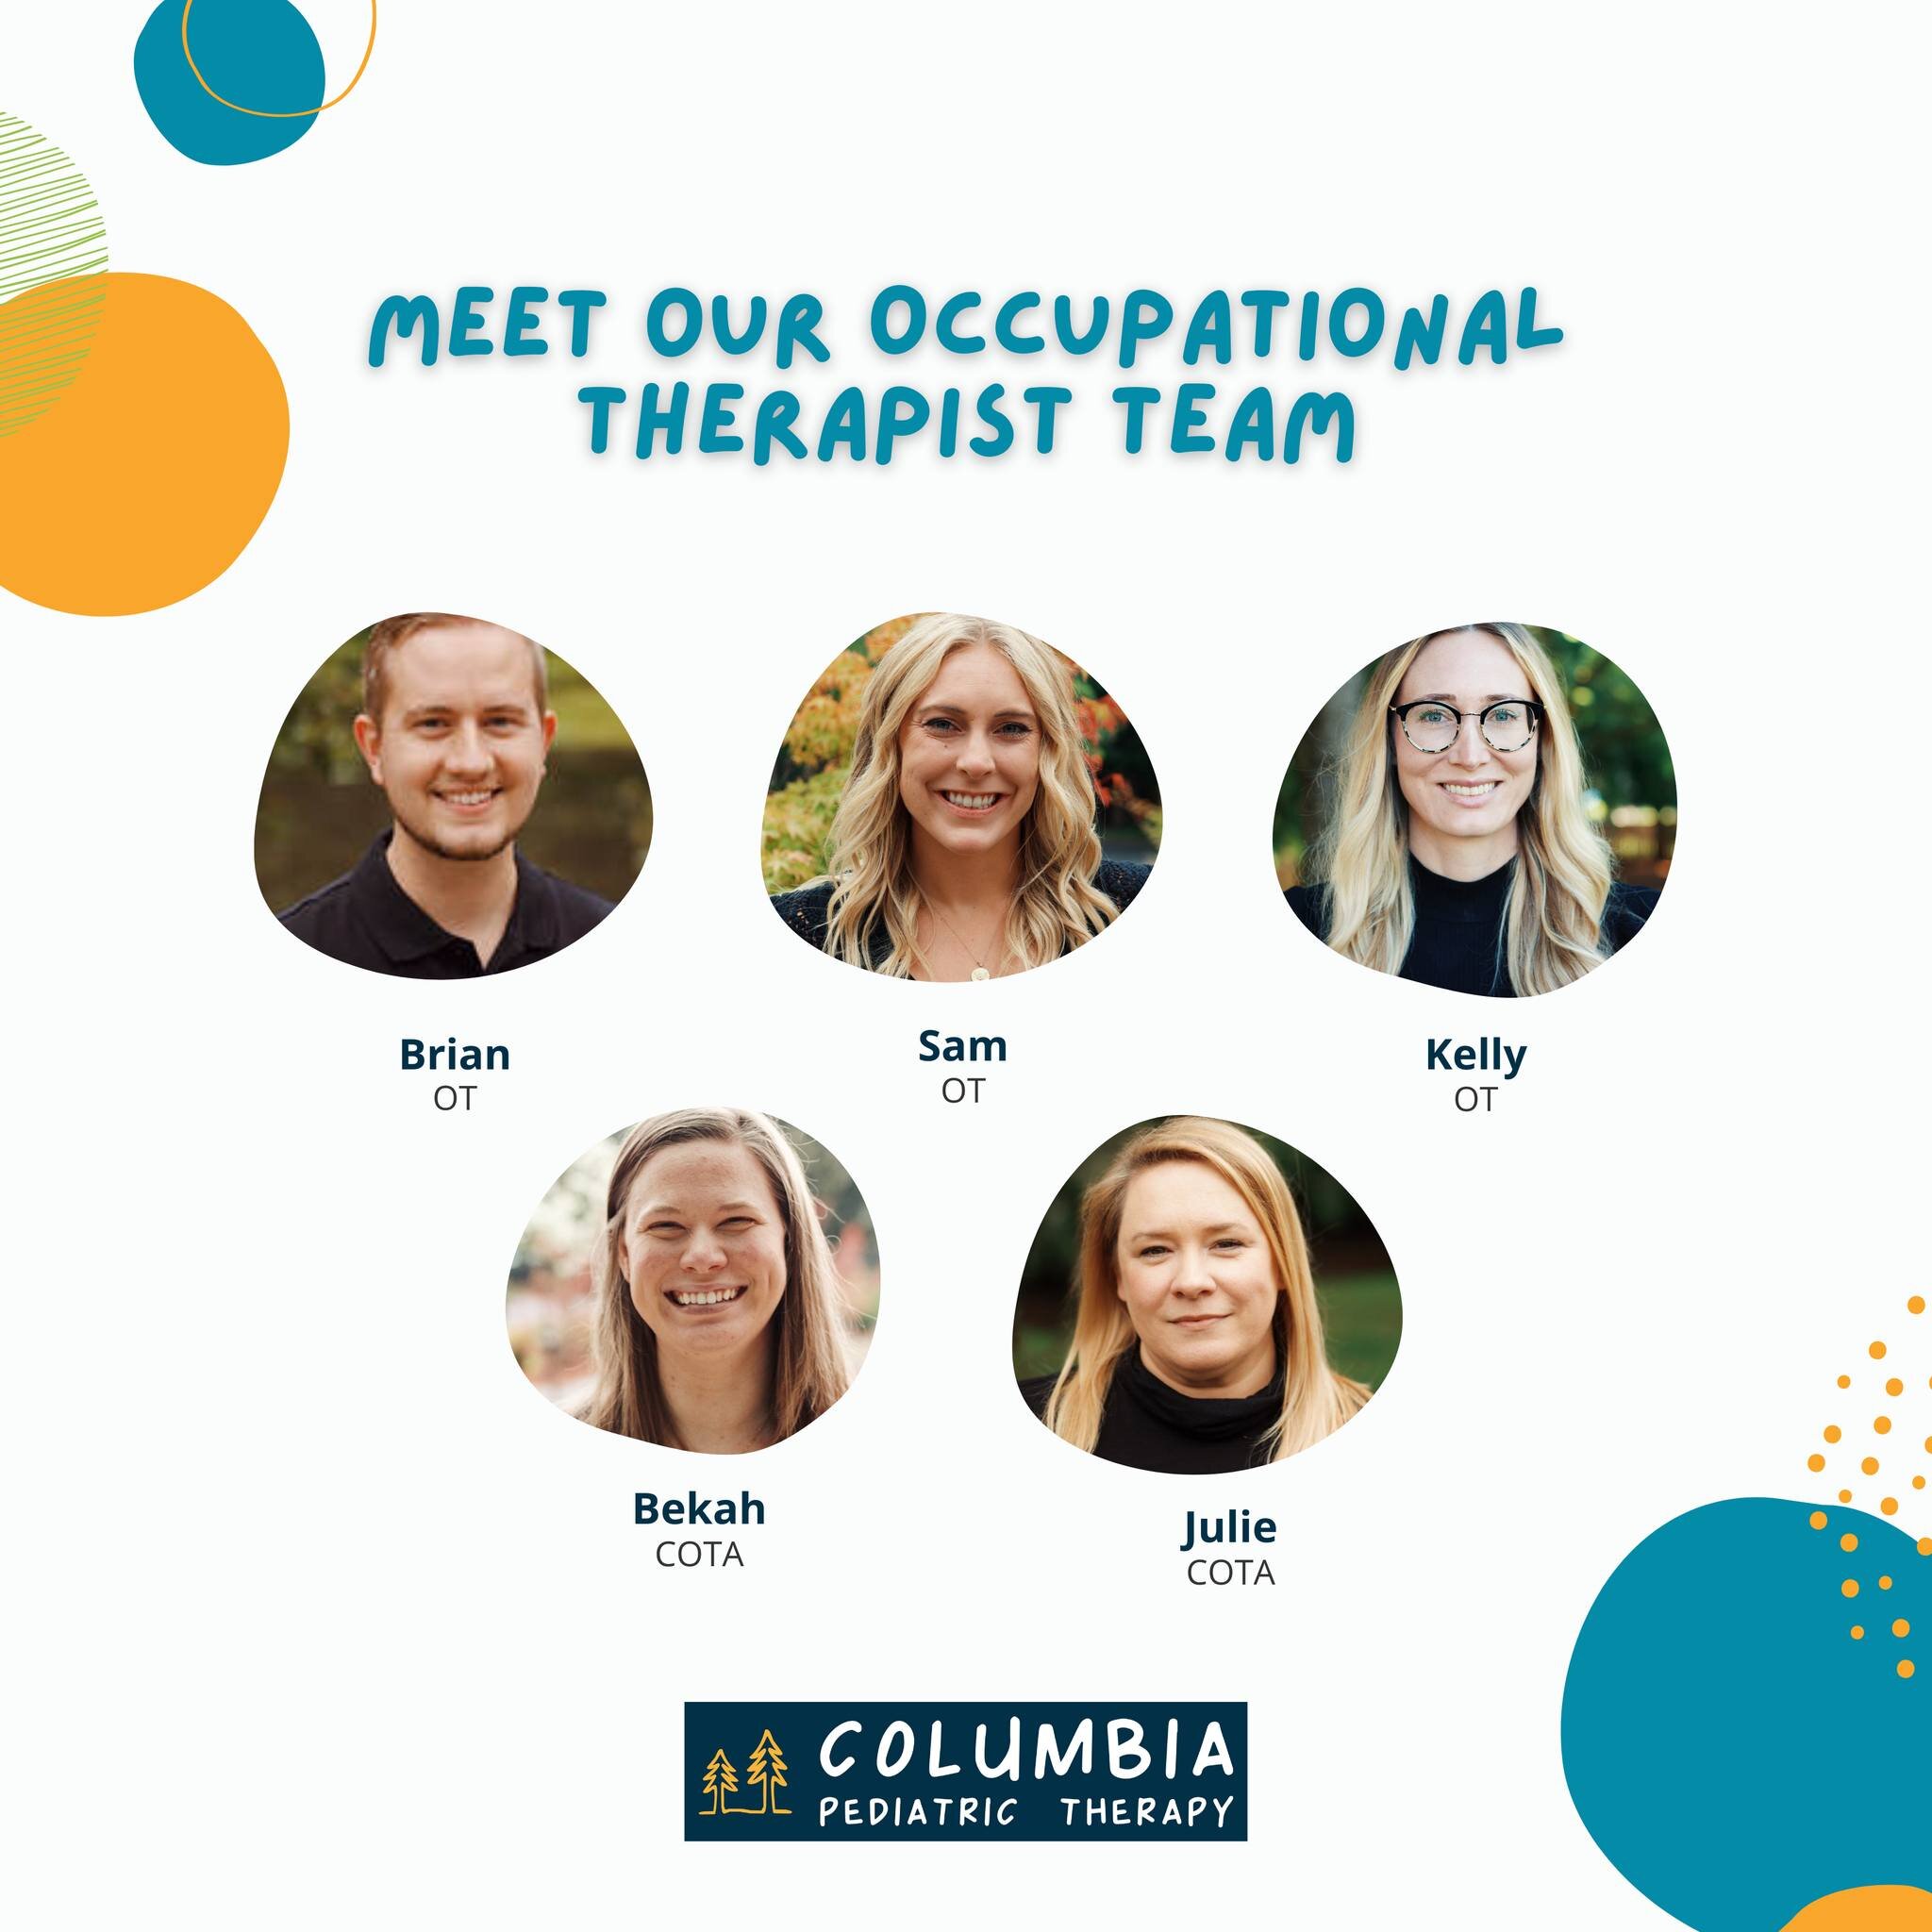 🌟 Meet Our Occupational Therapy Team! 🌟
Our therapists are dedicated to making a positive impact on the lives of children and families. From enhancing fine motor skills to promoting sensory integration, our OTs specialize in creating personalized t